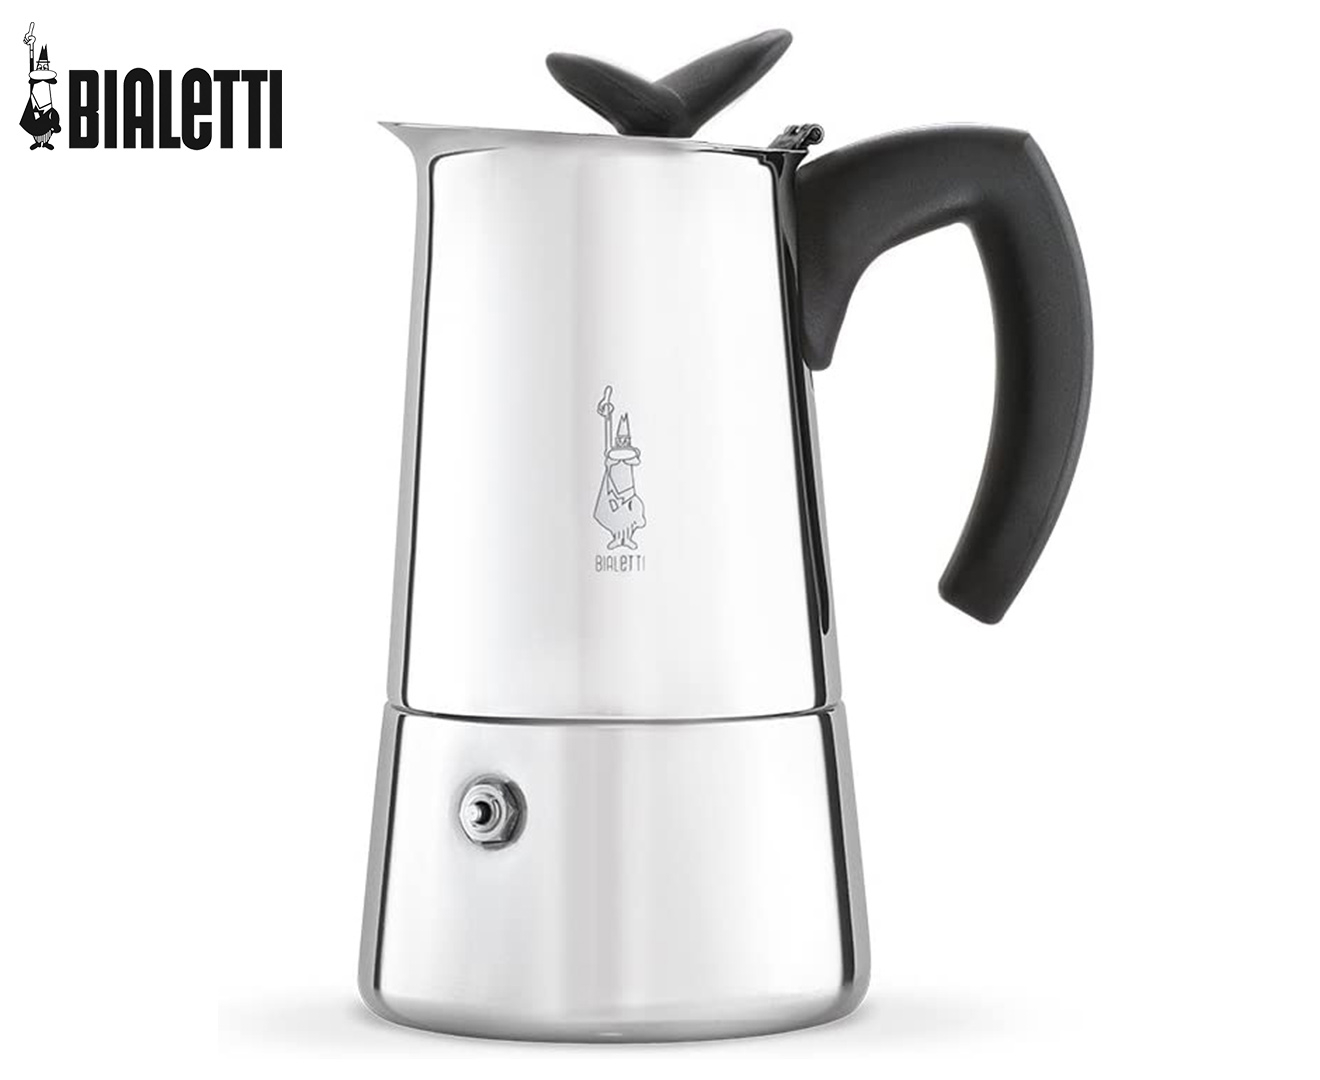 bialetti-4-cup-musa-induction-stovetop-espresso-maker-catch-co-nz